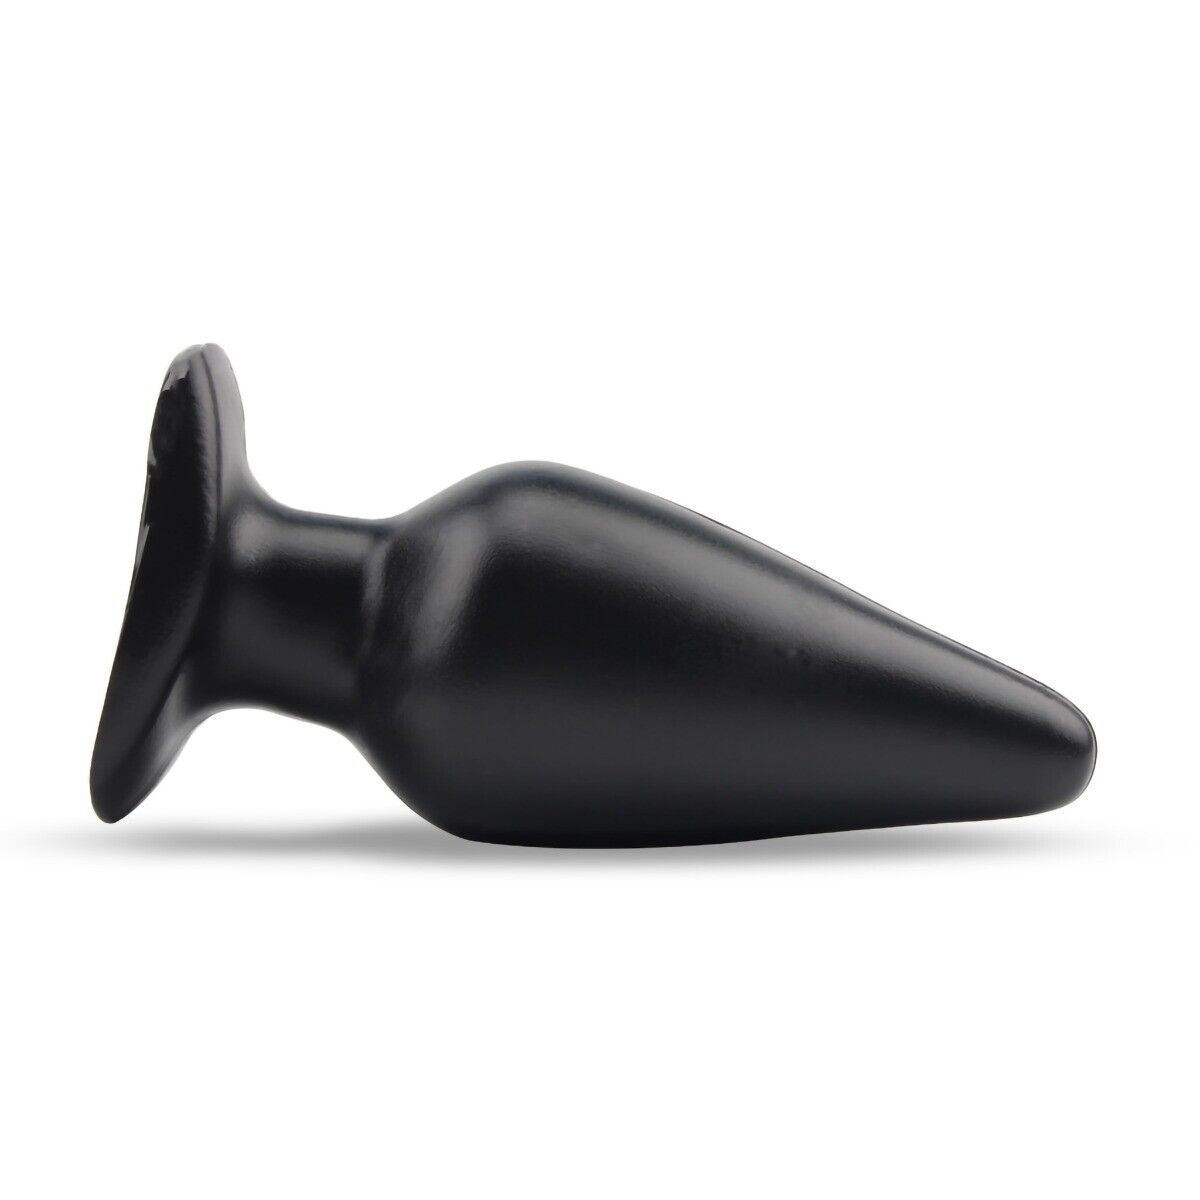 Soft Smooth Flexible 5" Black Anal Butt Plug Anal Play Training Sex Toy